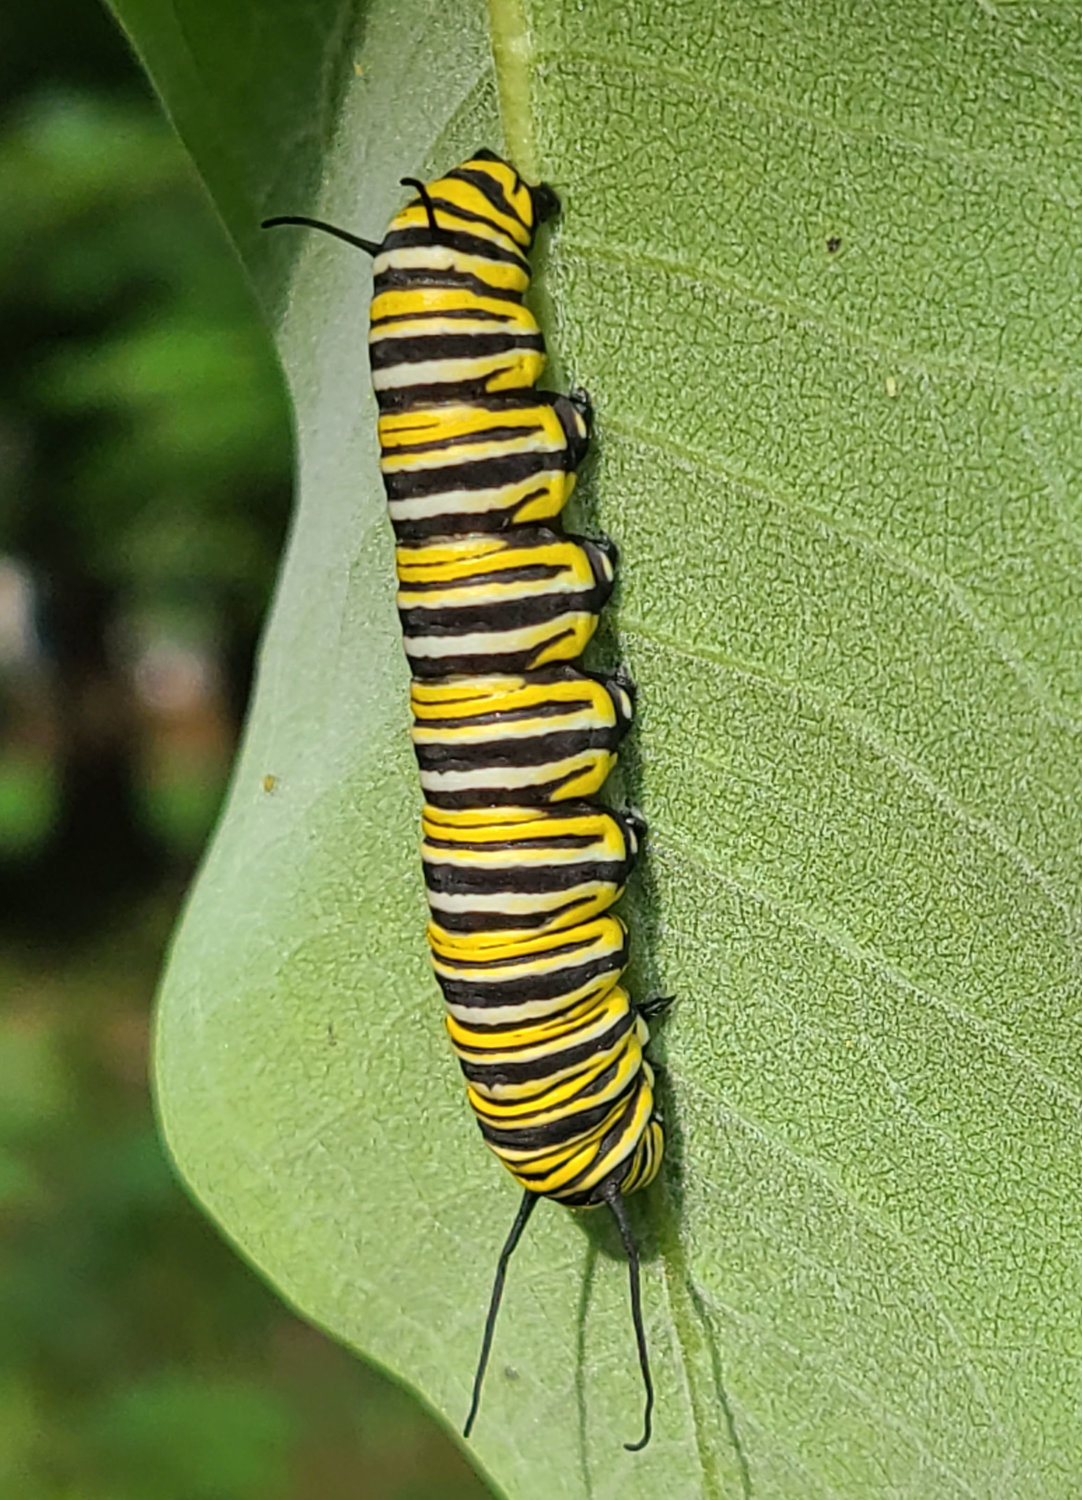 This is a larger Monarch caterpillar, probably in its fifth instar. The only plant this caterpillar eats in the larval stage is milkweed. The bright stripes are advertise that this caterpillar contains some of the milkweed’s noxious compounds; this helps to ward off would-be predators. Due to the timing (all images here were taken around Aug 1), this caterpillar will become part of the last generation of the summer and become part of the 2021 migration to Mexico.